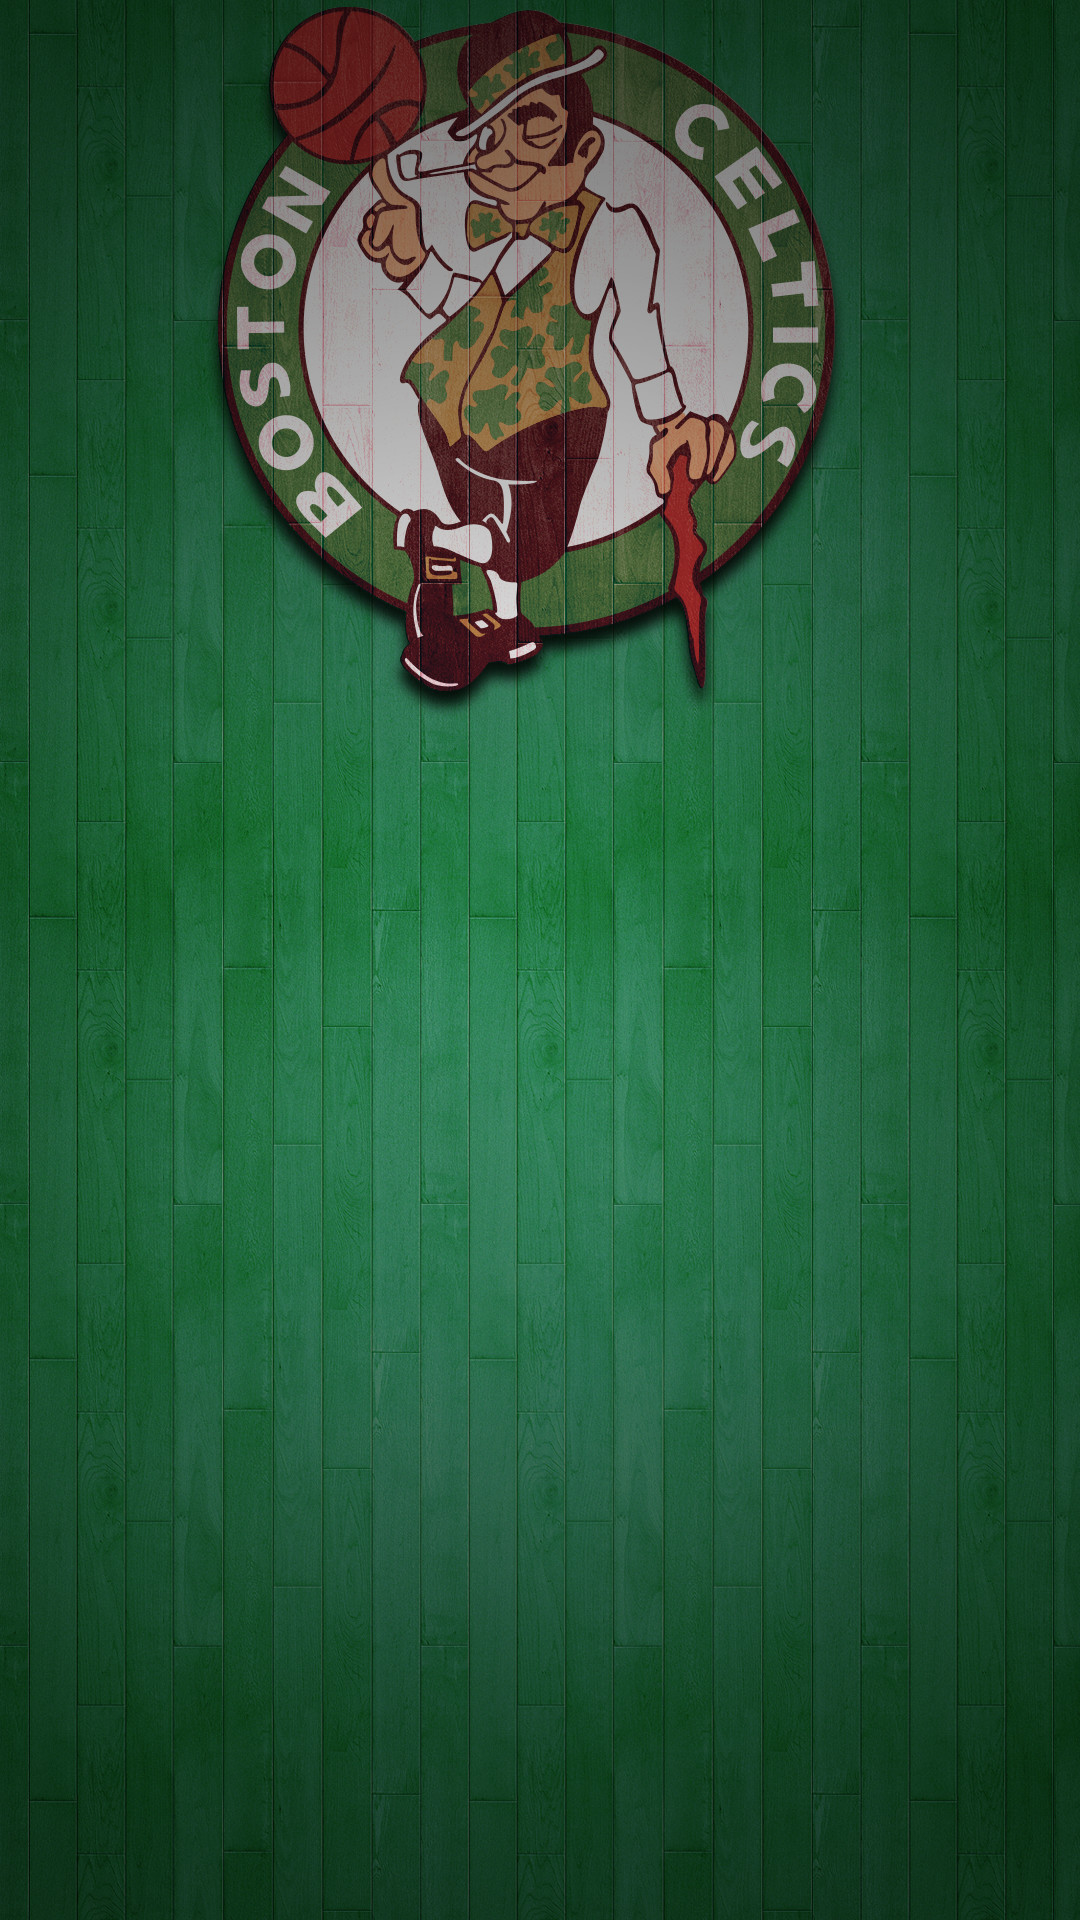 1080x1920 Boston Celtics 2017 Mobile home screen wallpaper for iPhone, Android, Pixel